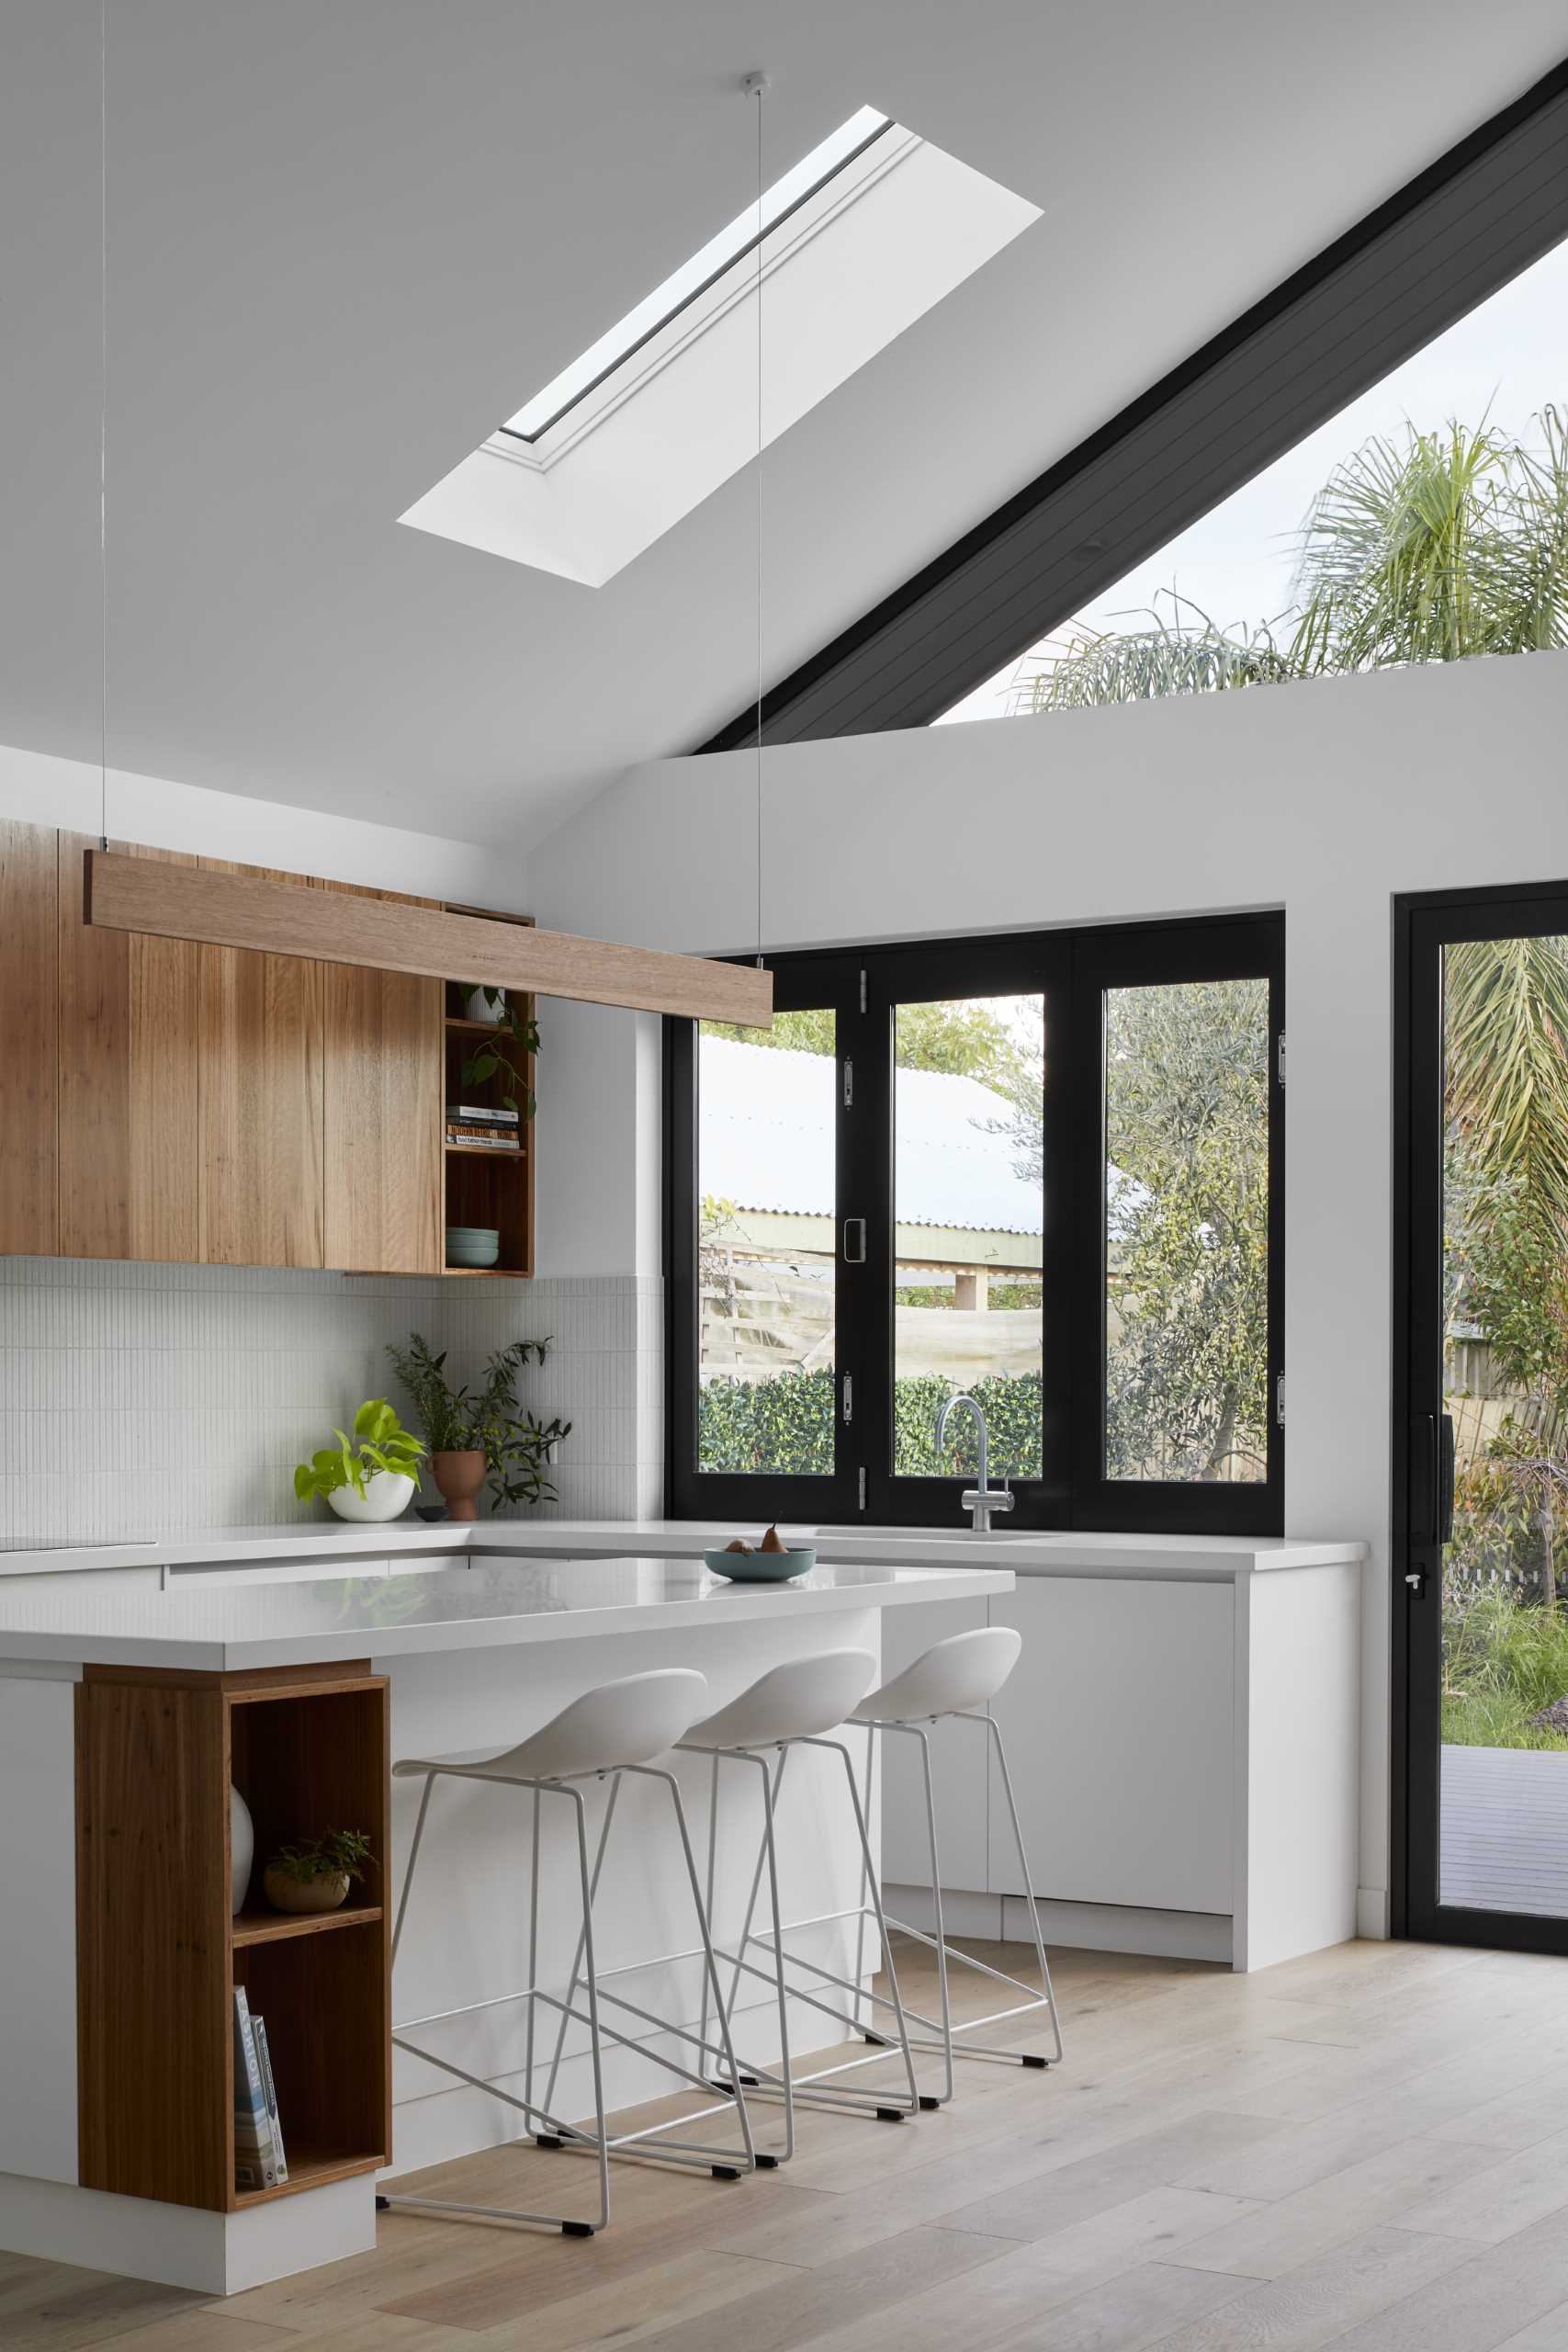 The folding pass-through window connects the kitchen to the outdoor space, while the rest of the kitchen includes white and wood cabinets, a skylight, and an island with open shelving.